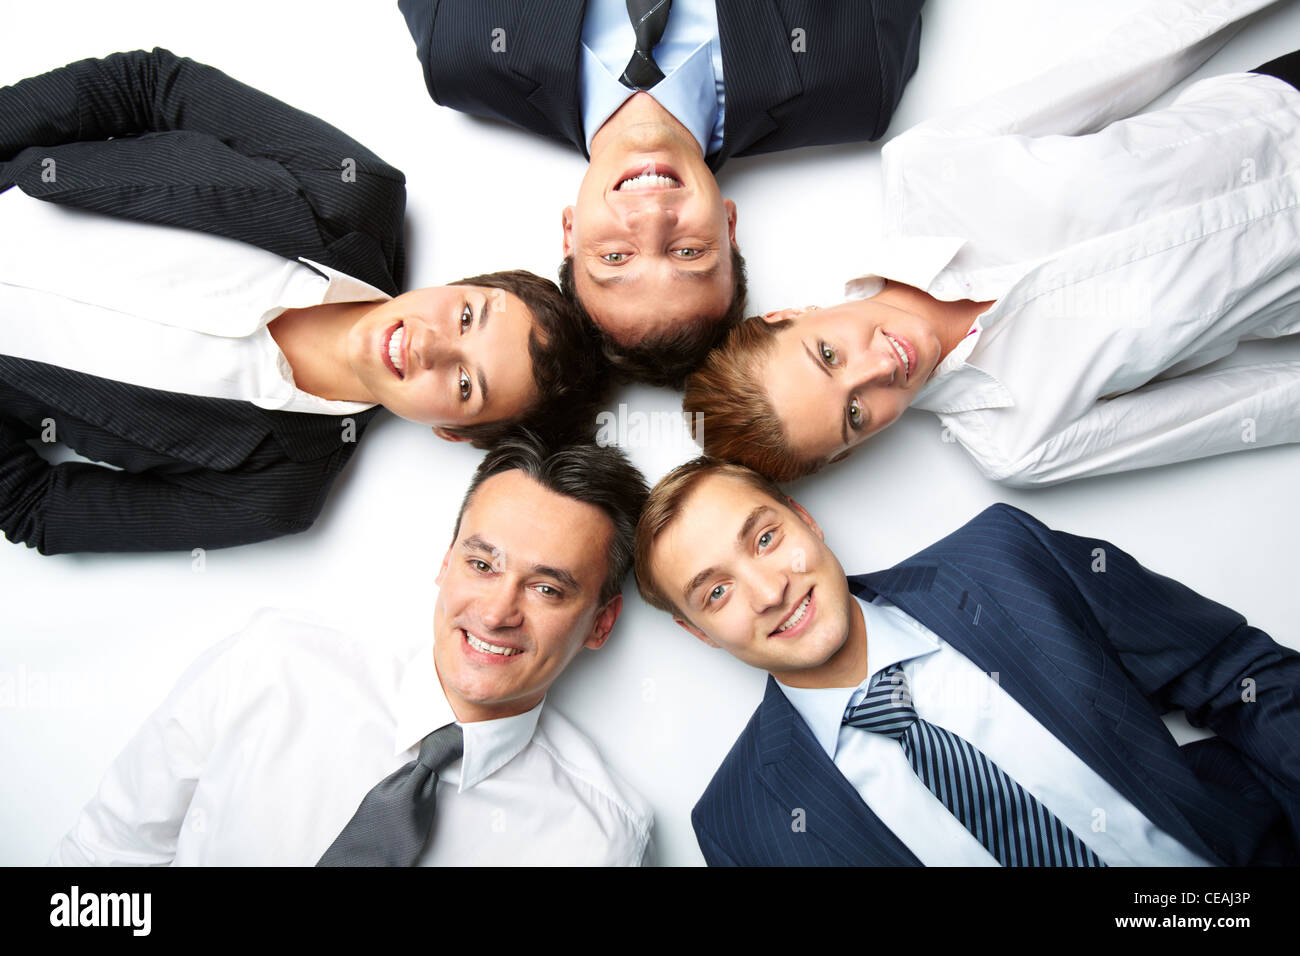 Five Business People Lying On The Floor Looking At Camera And